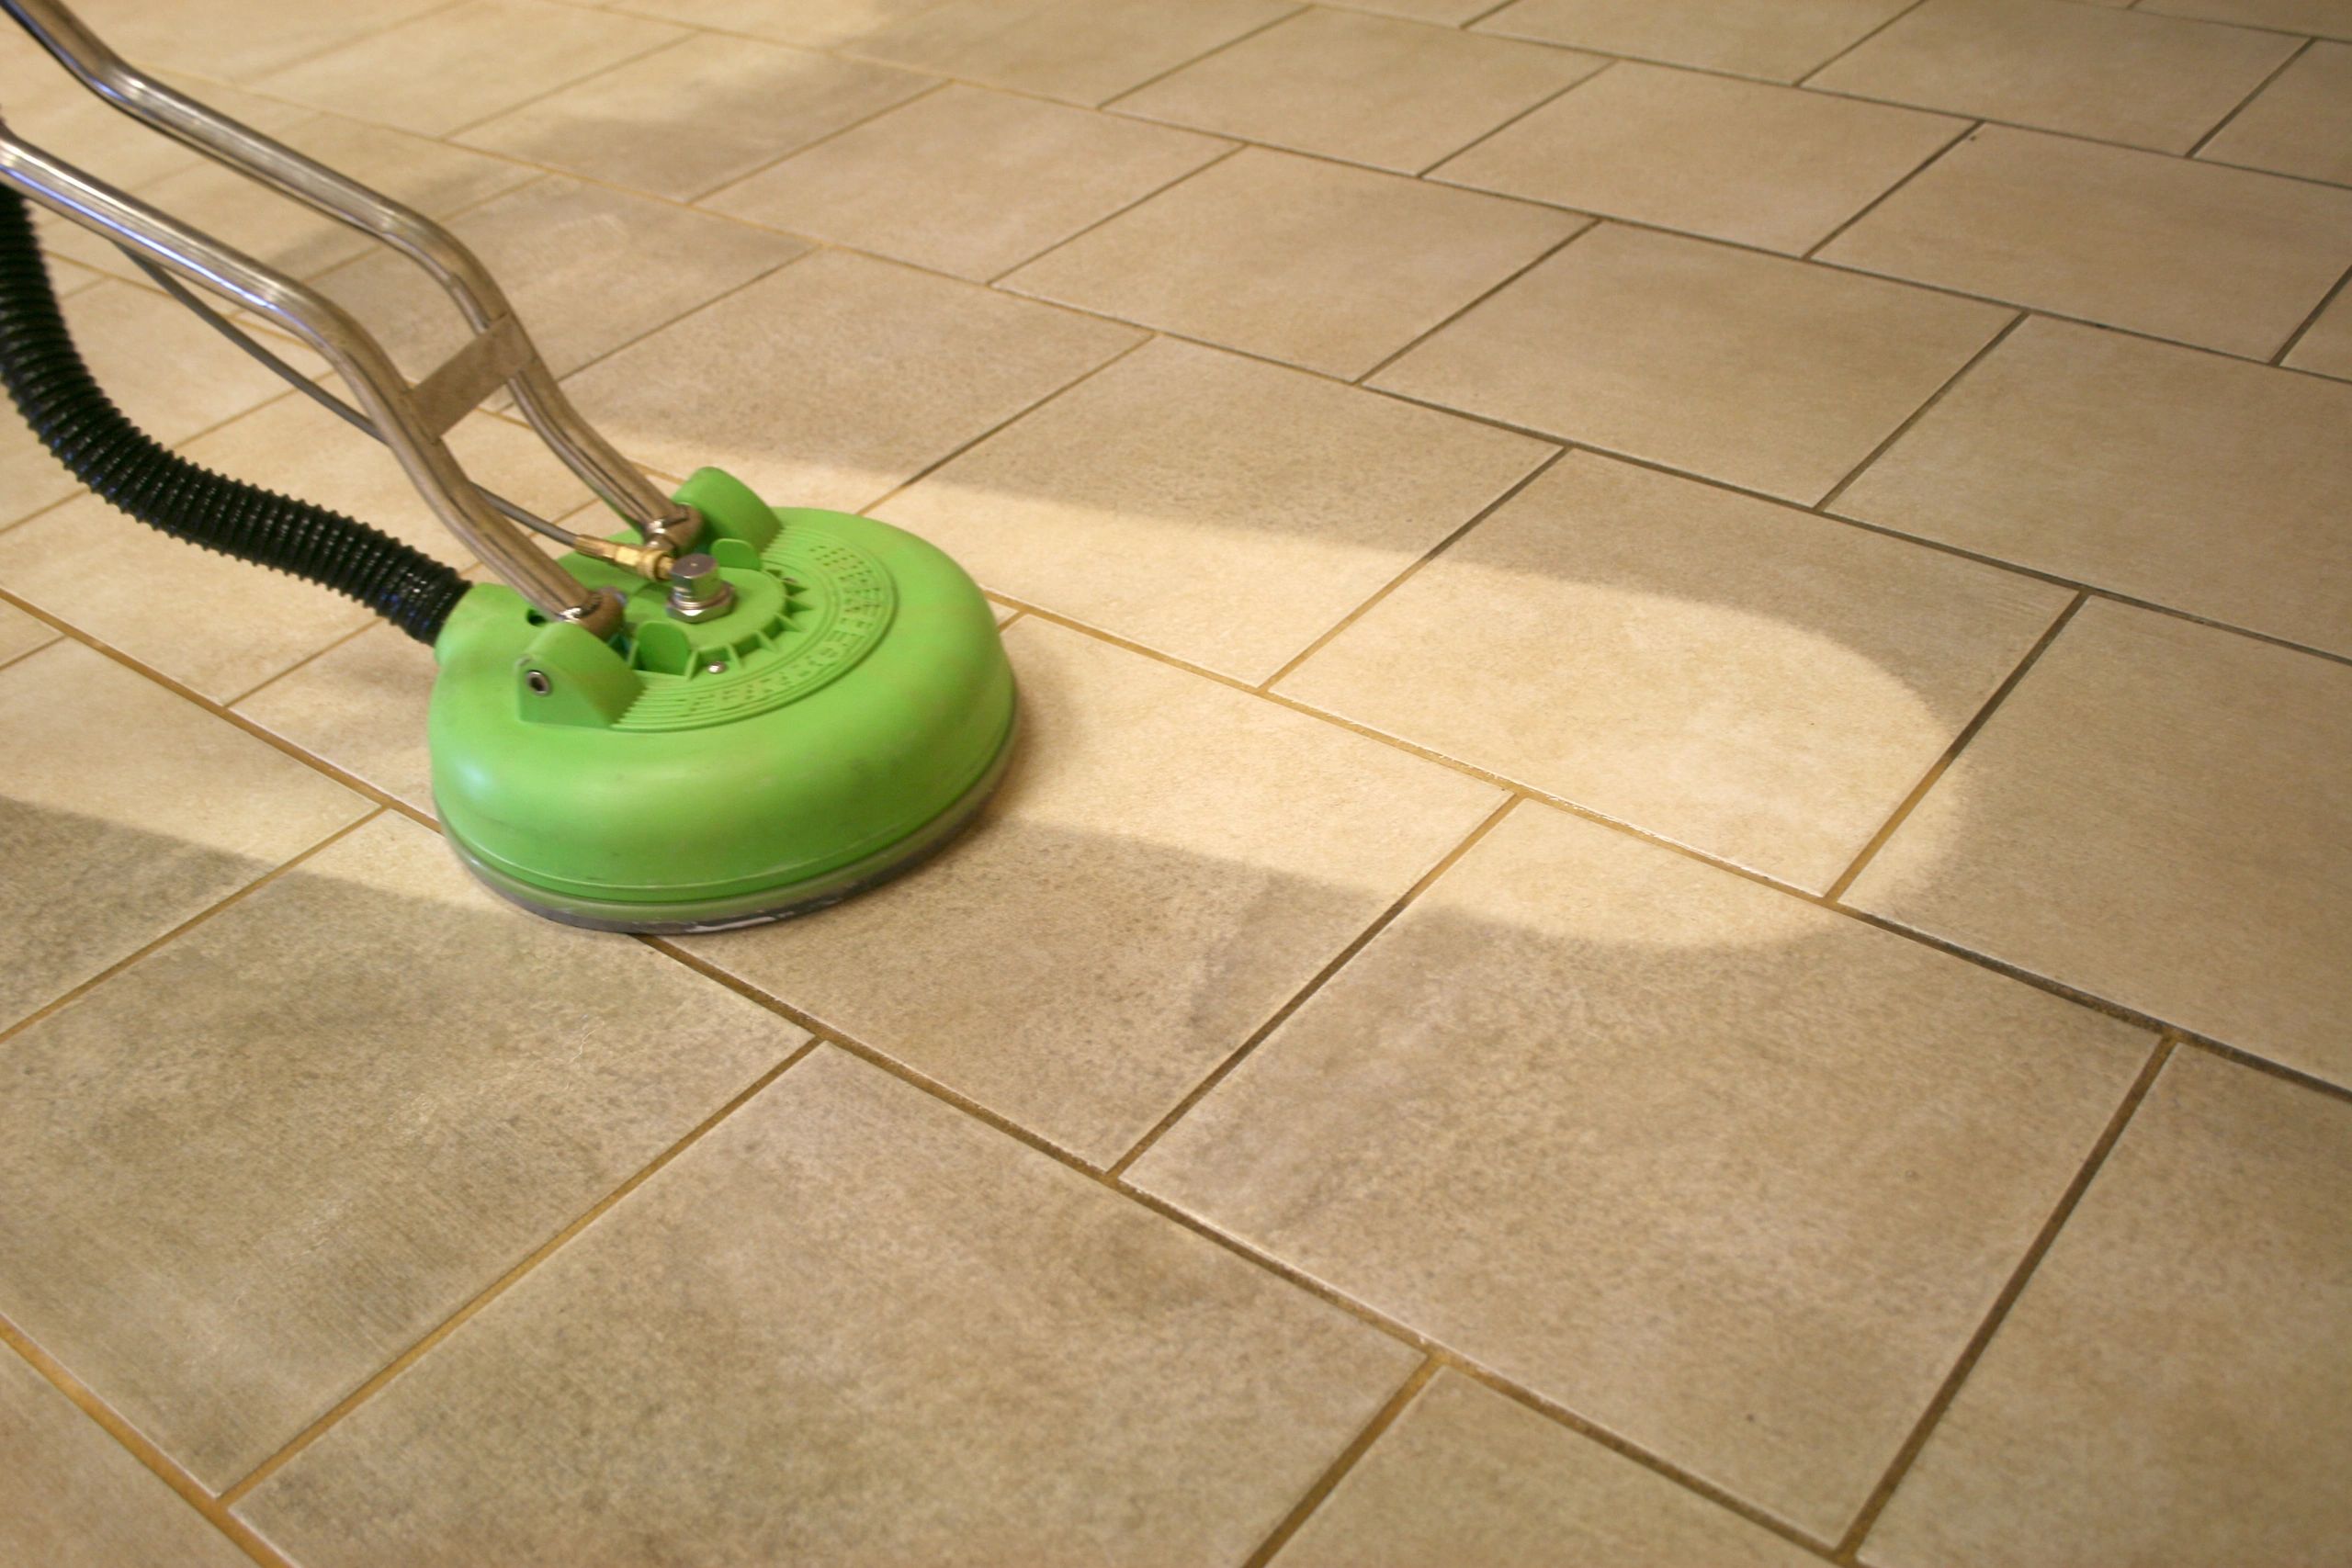 Metro Cleaning Solution - Grout and Tile Cleaning, Floor Scrubbing